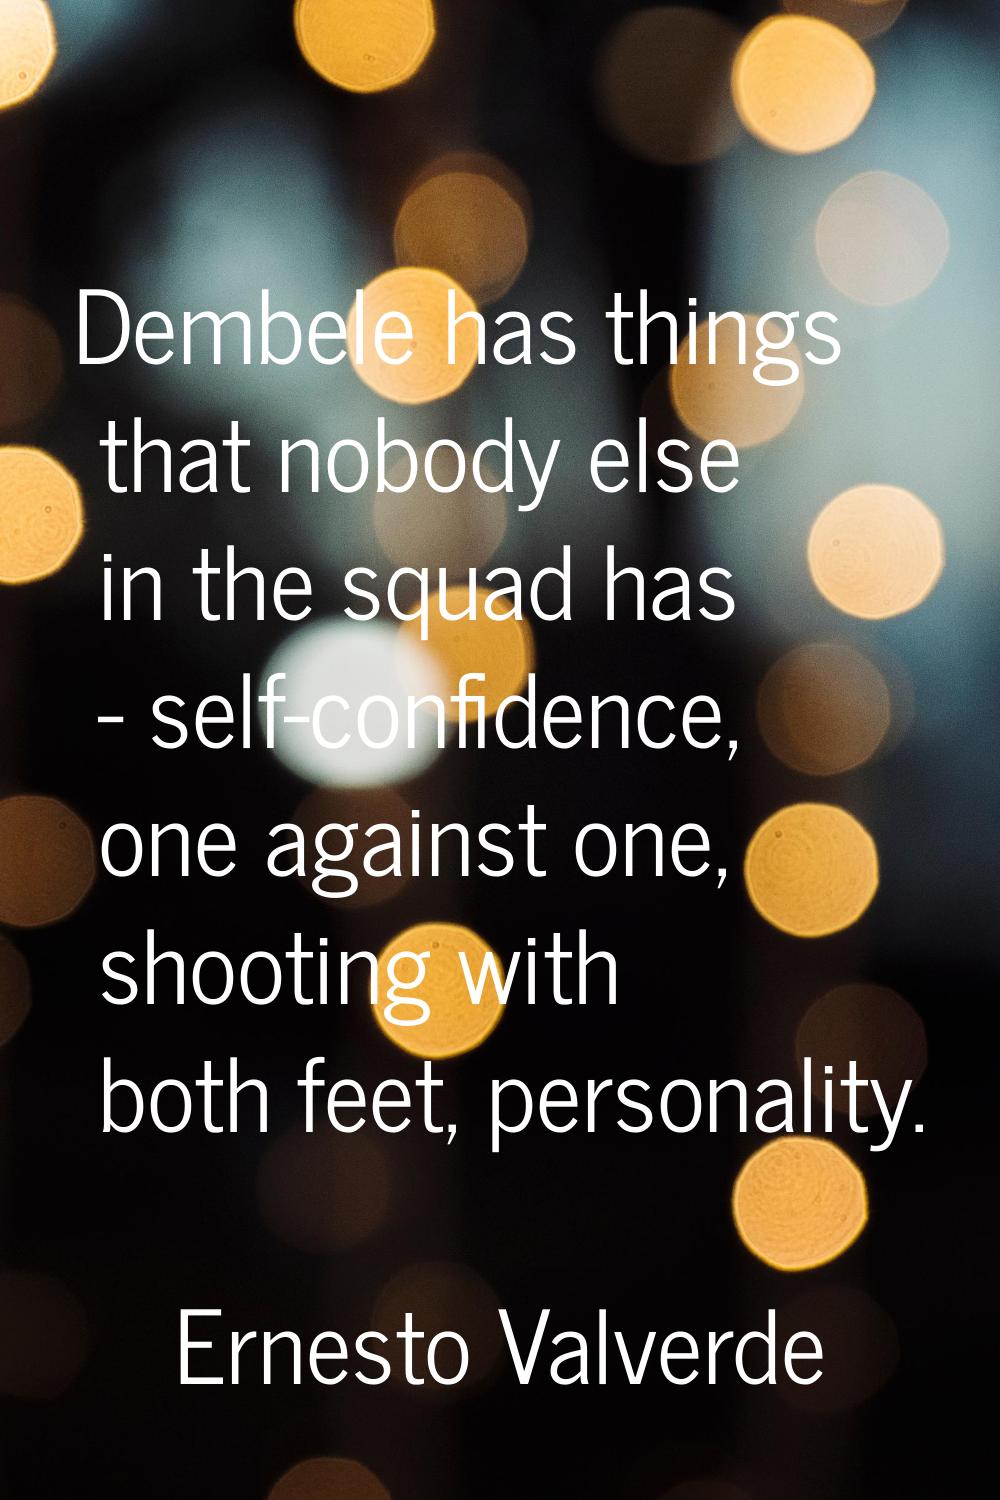 Dembele has things that nobody else in the squad has - self-confidence, one against one, shooting w